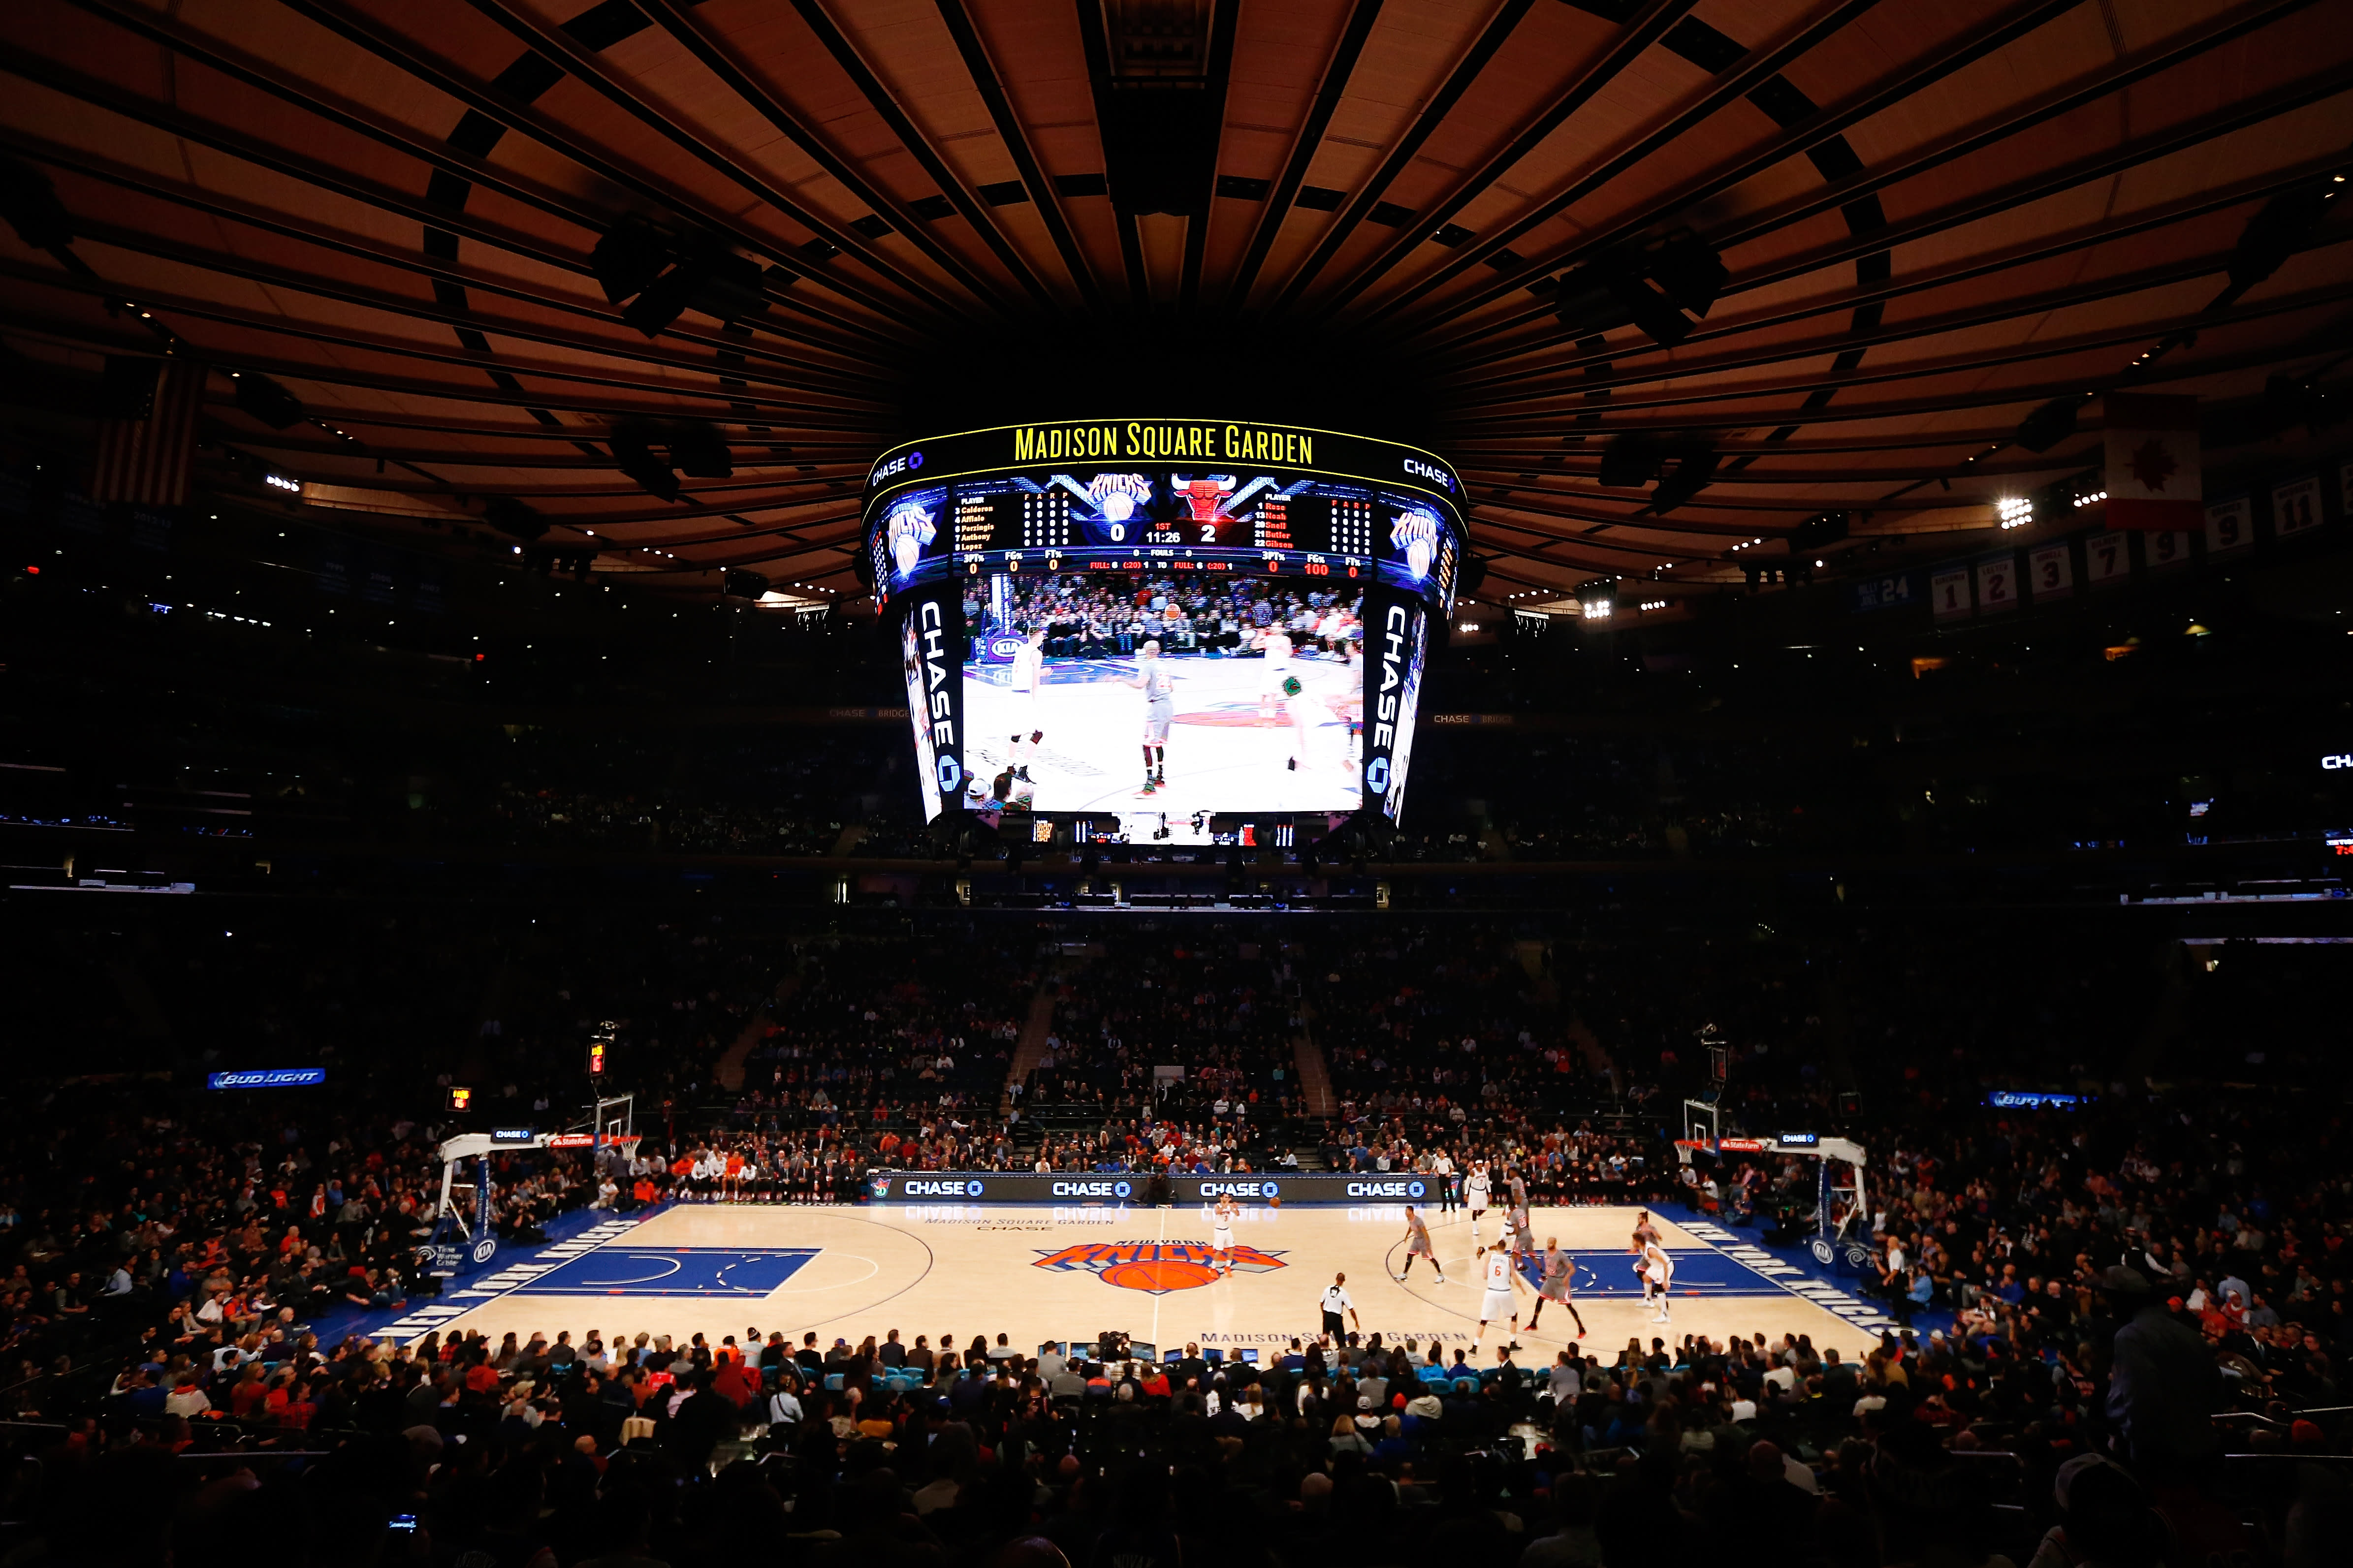 NBA: Knicks fans allegedly ejected for 'Sell the team' chant